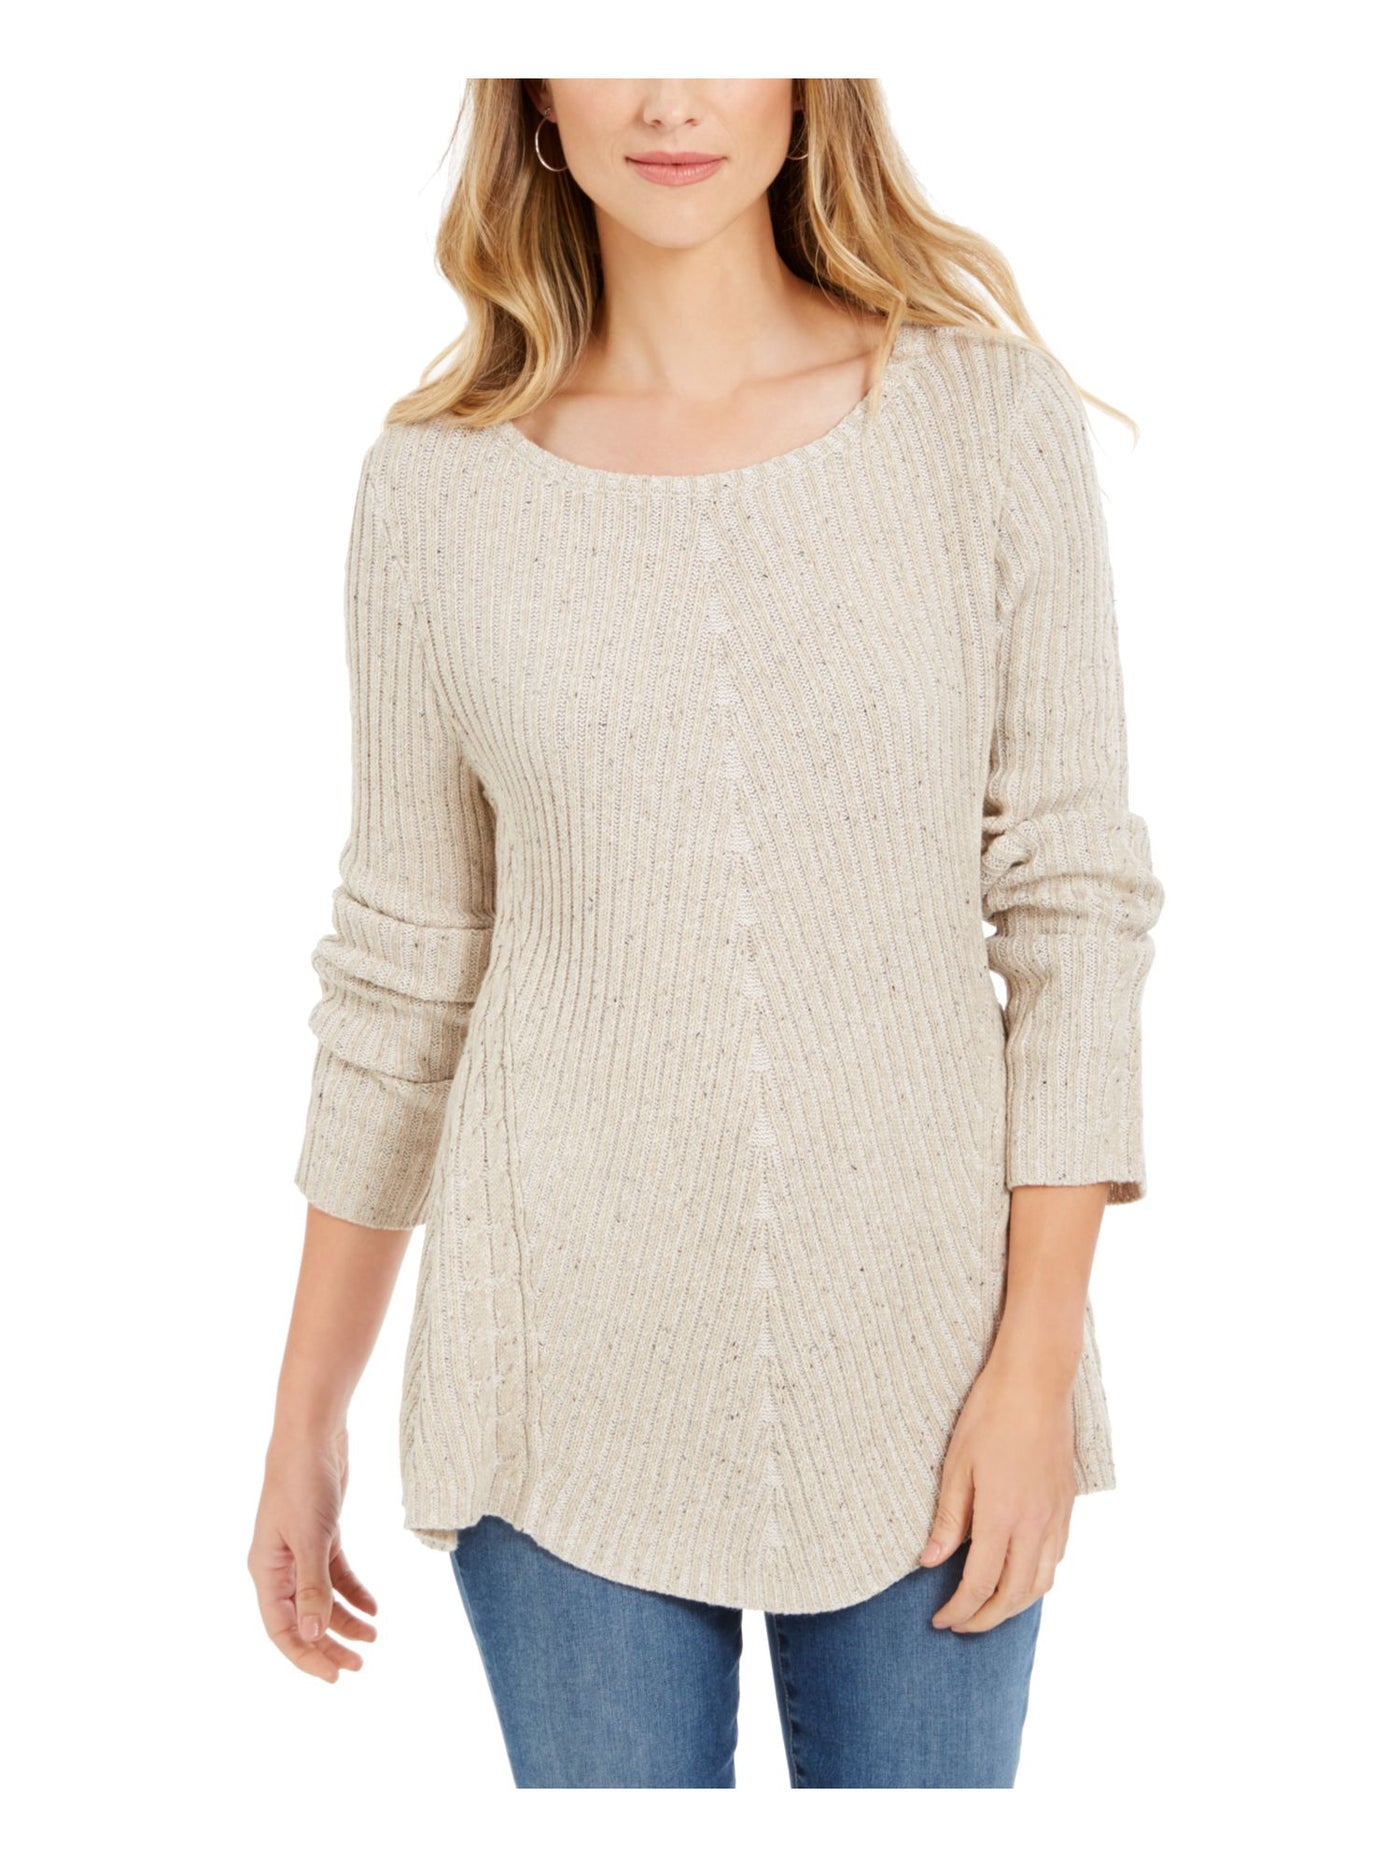 STYLE & COMPANY Womens Beige Textured Speckle Long Sleeve Jewel Neck T-Shirt Petites PP